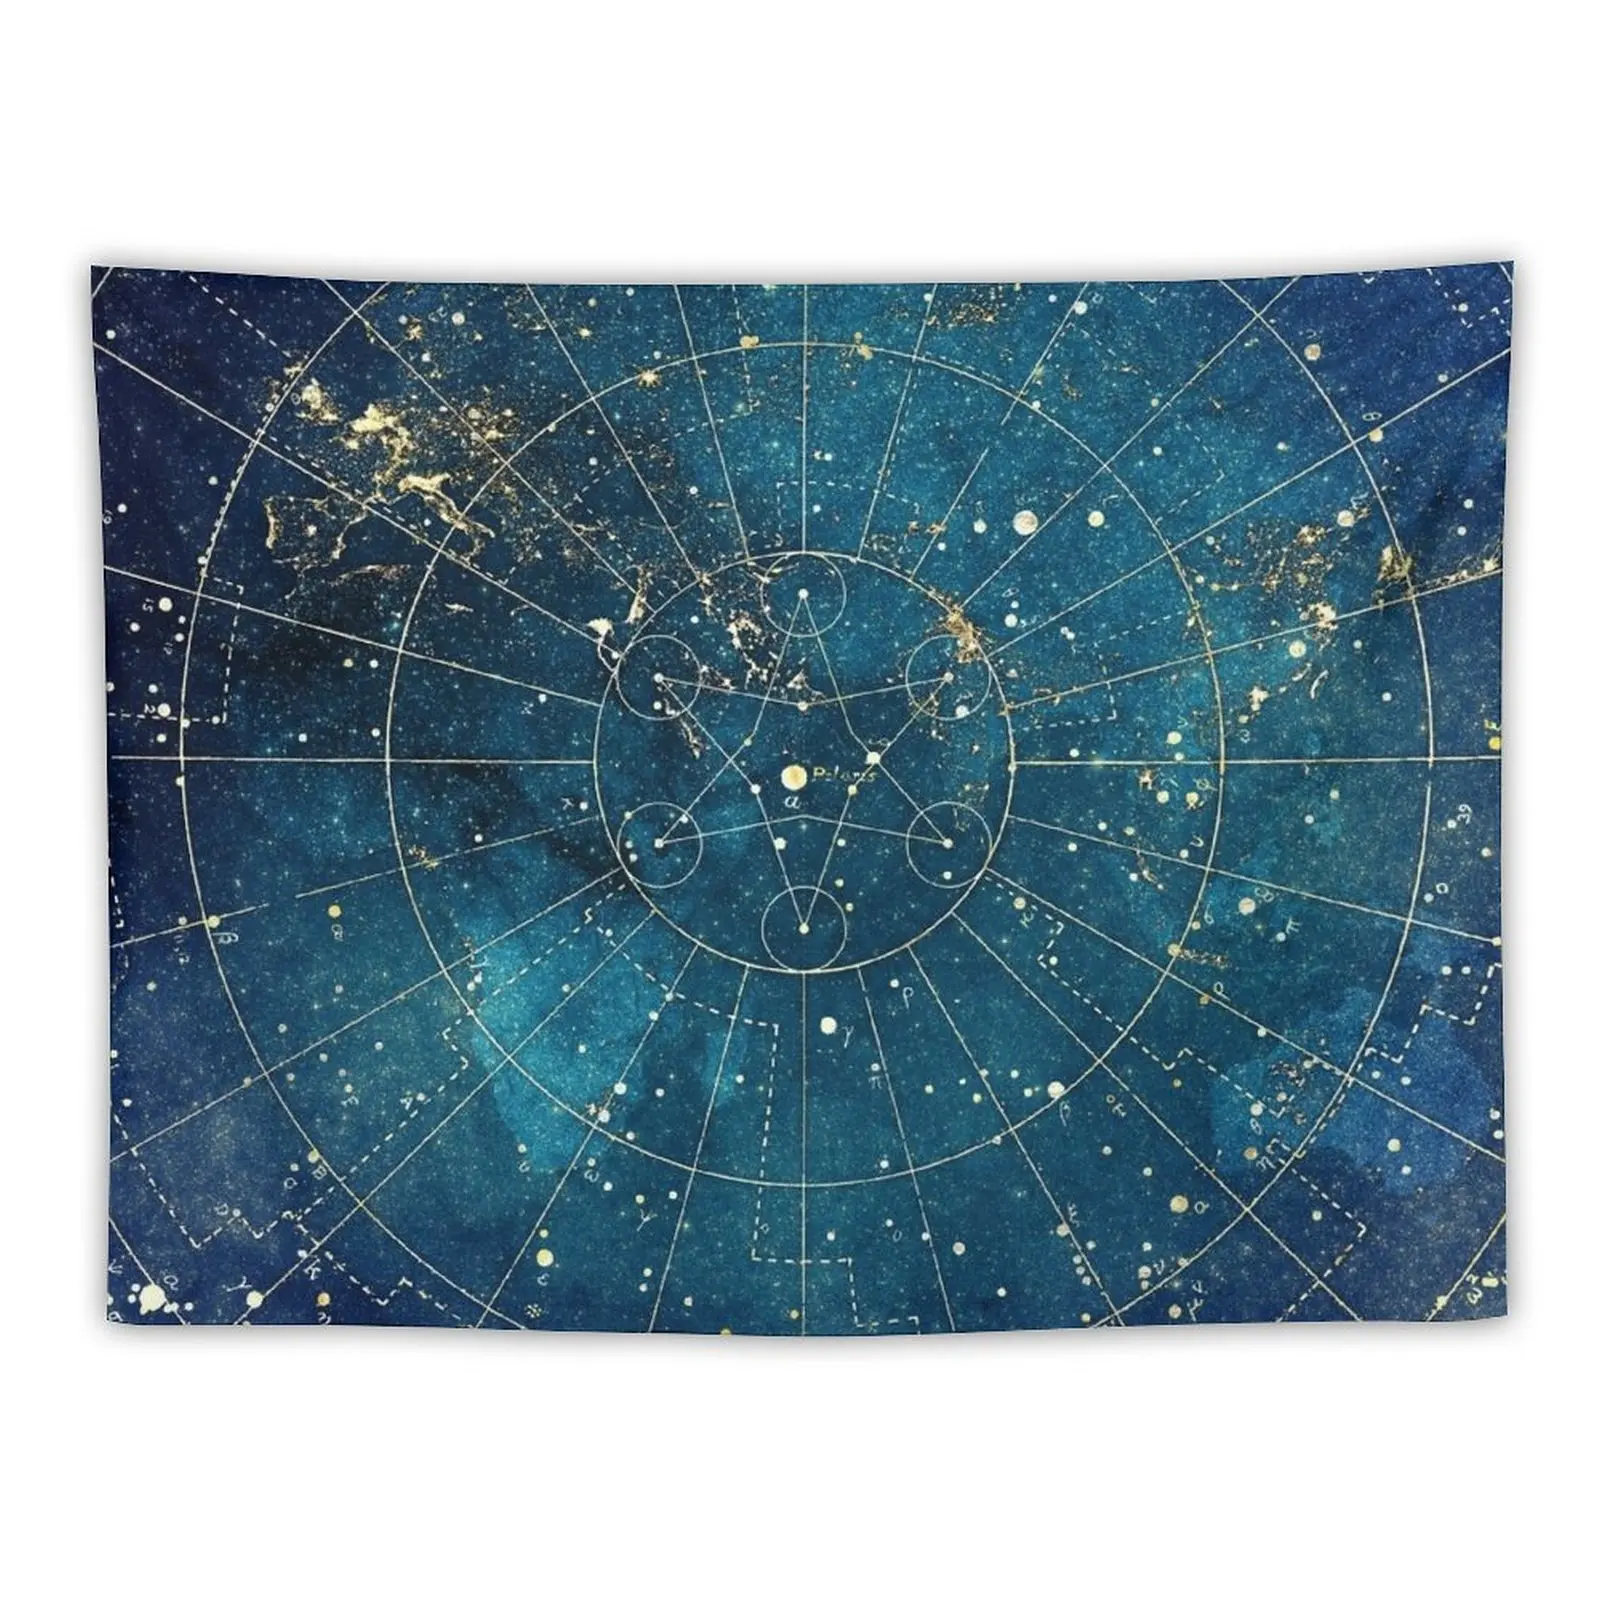 

Star Map :: City Lights Tapestry Wall Coverings Bedroom Decor Decorative Wall Murals Tapestry